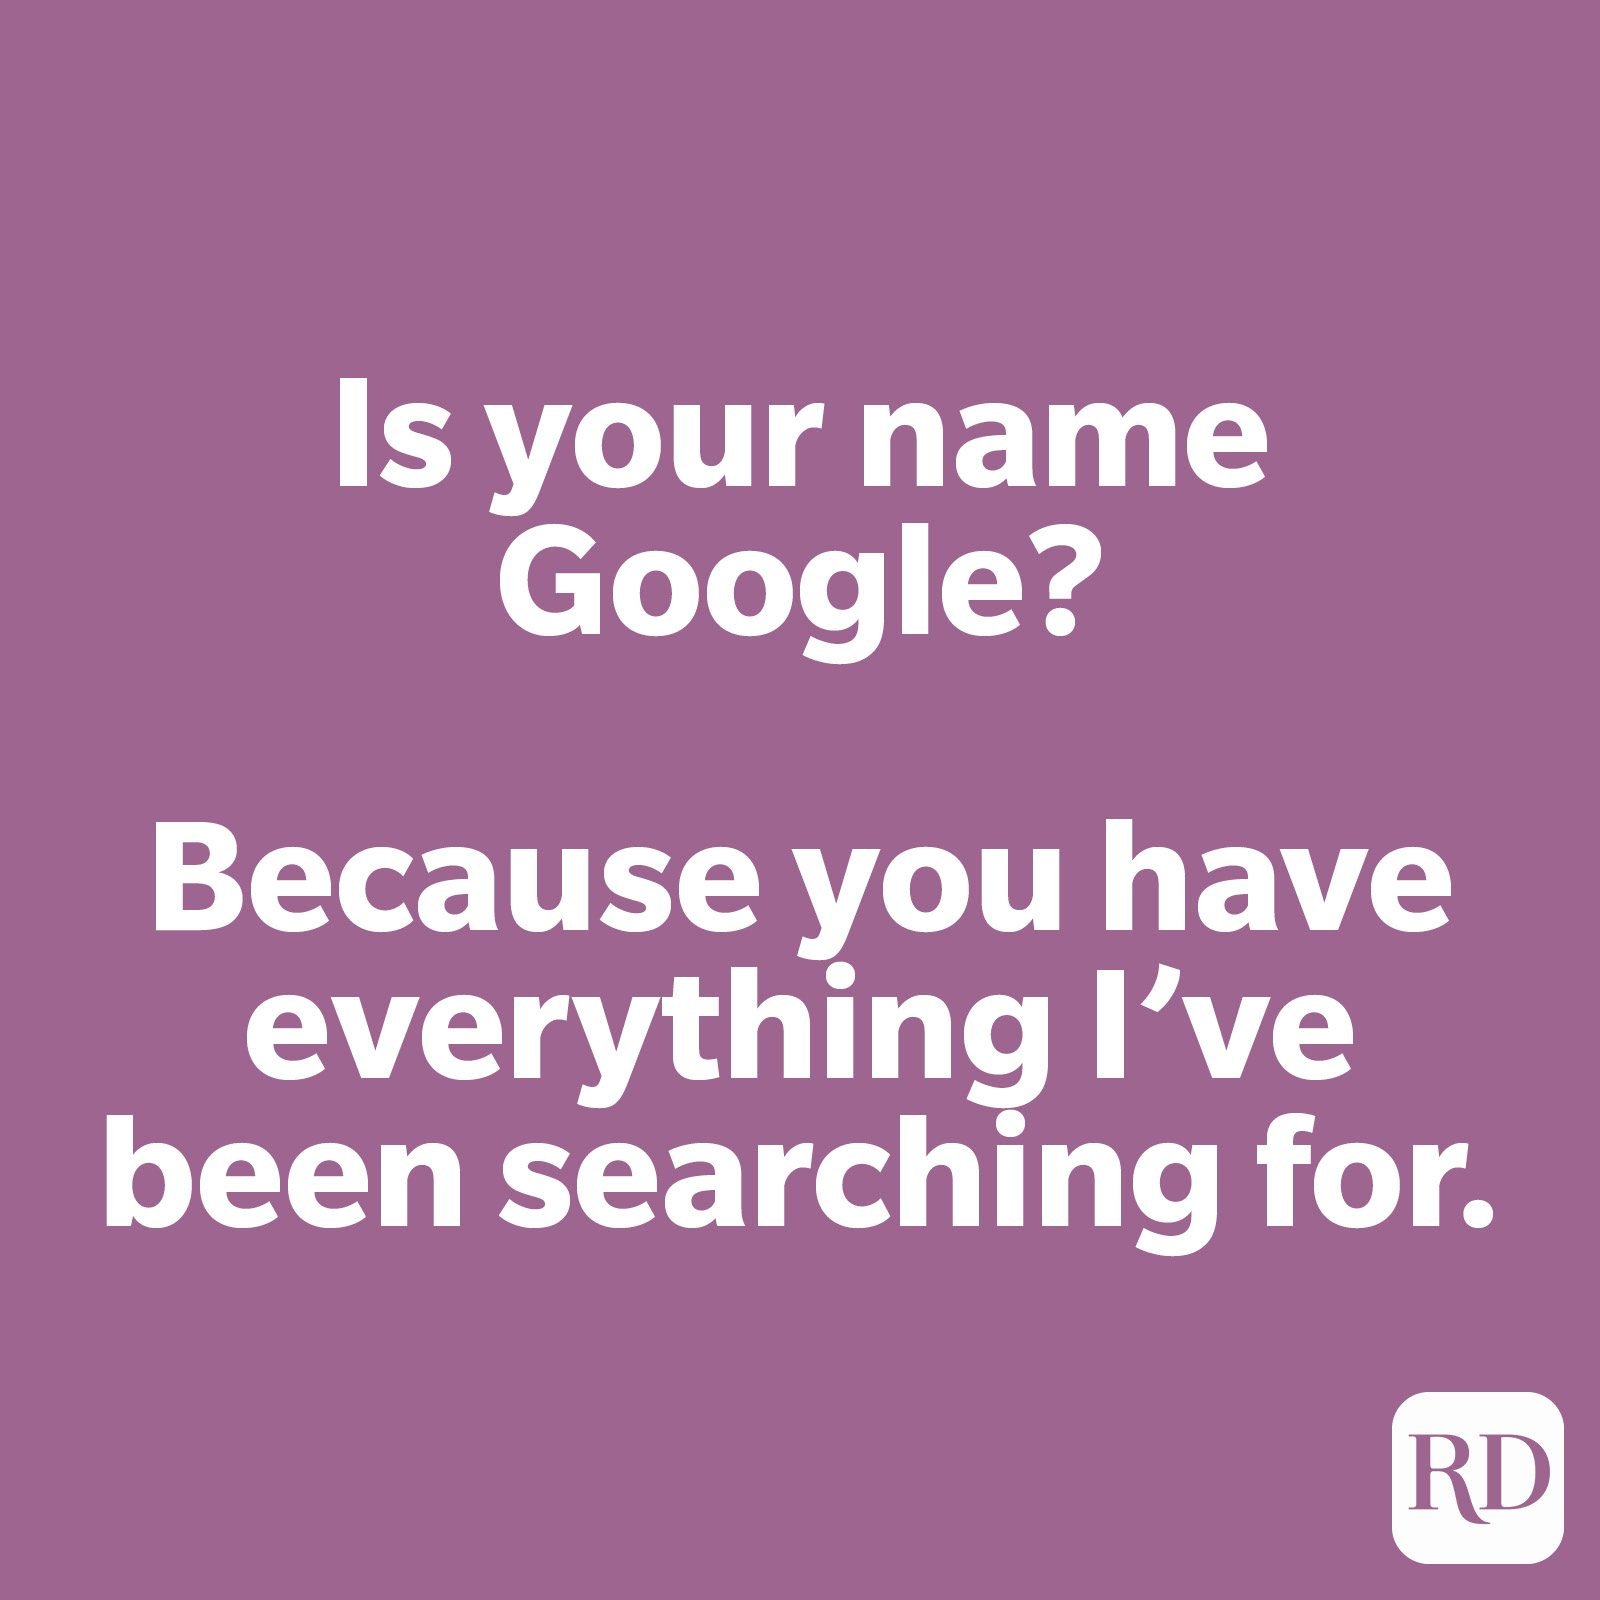 Is your name Google? Because you have everything I’ve been searching for.